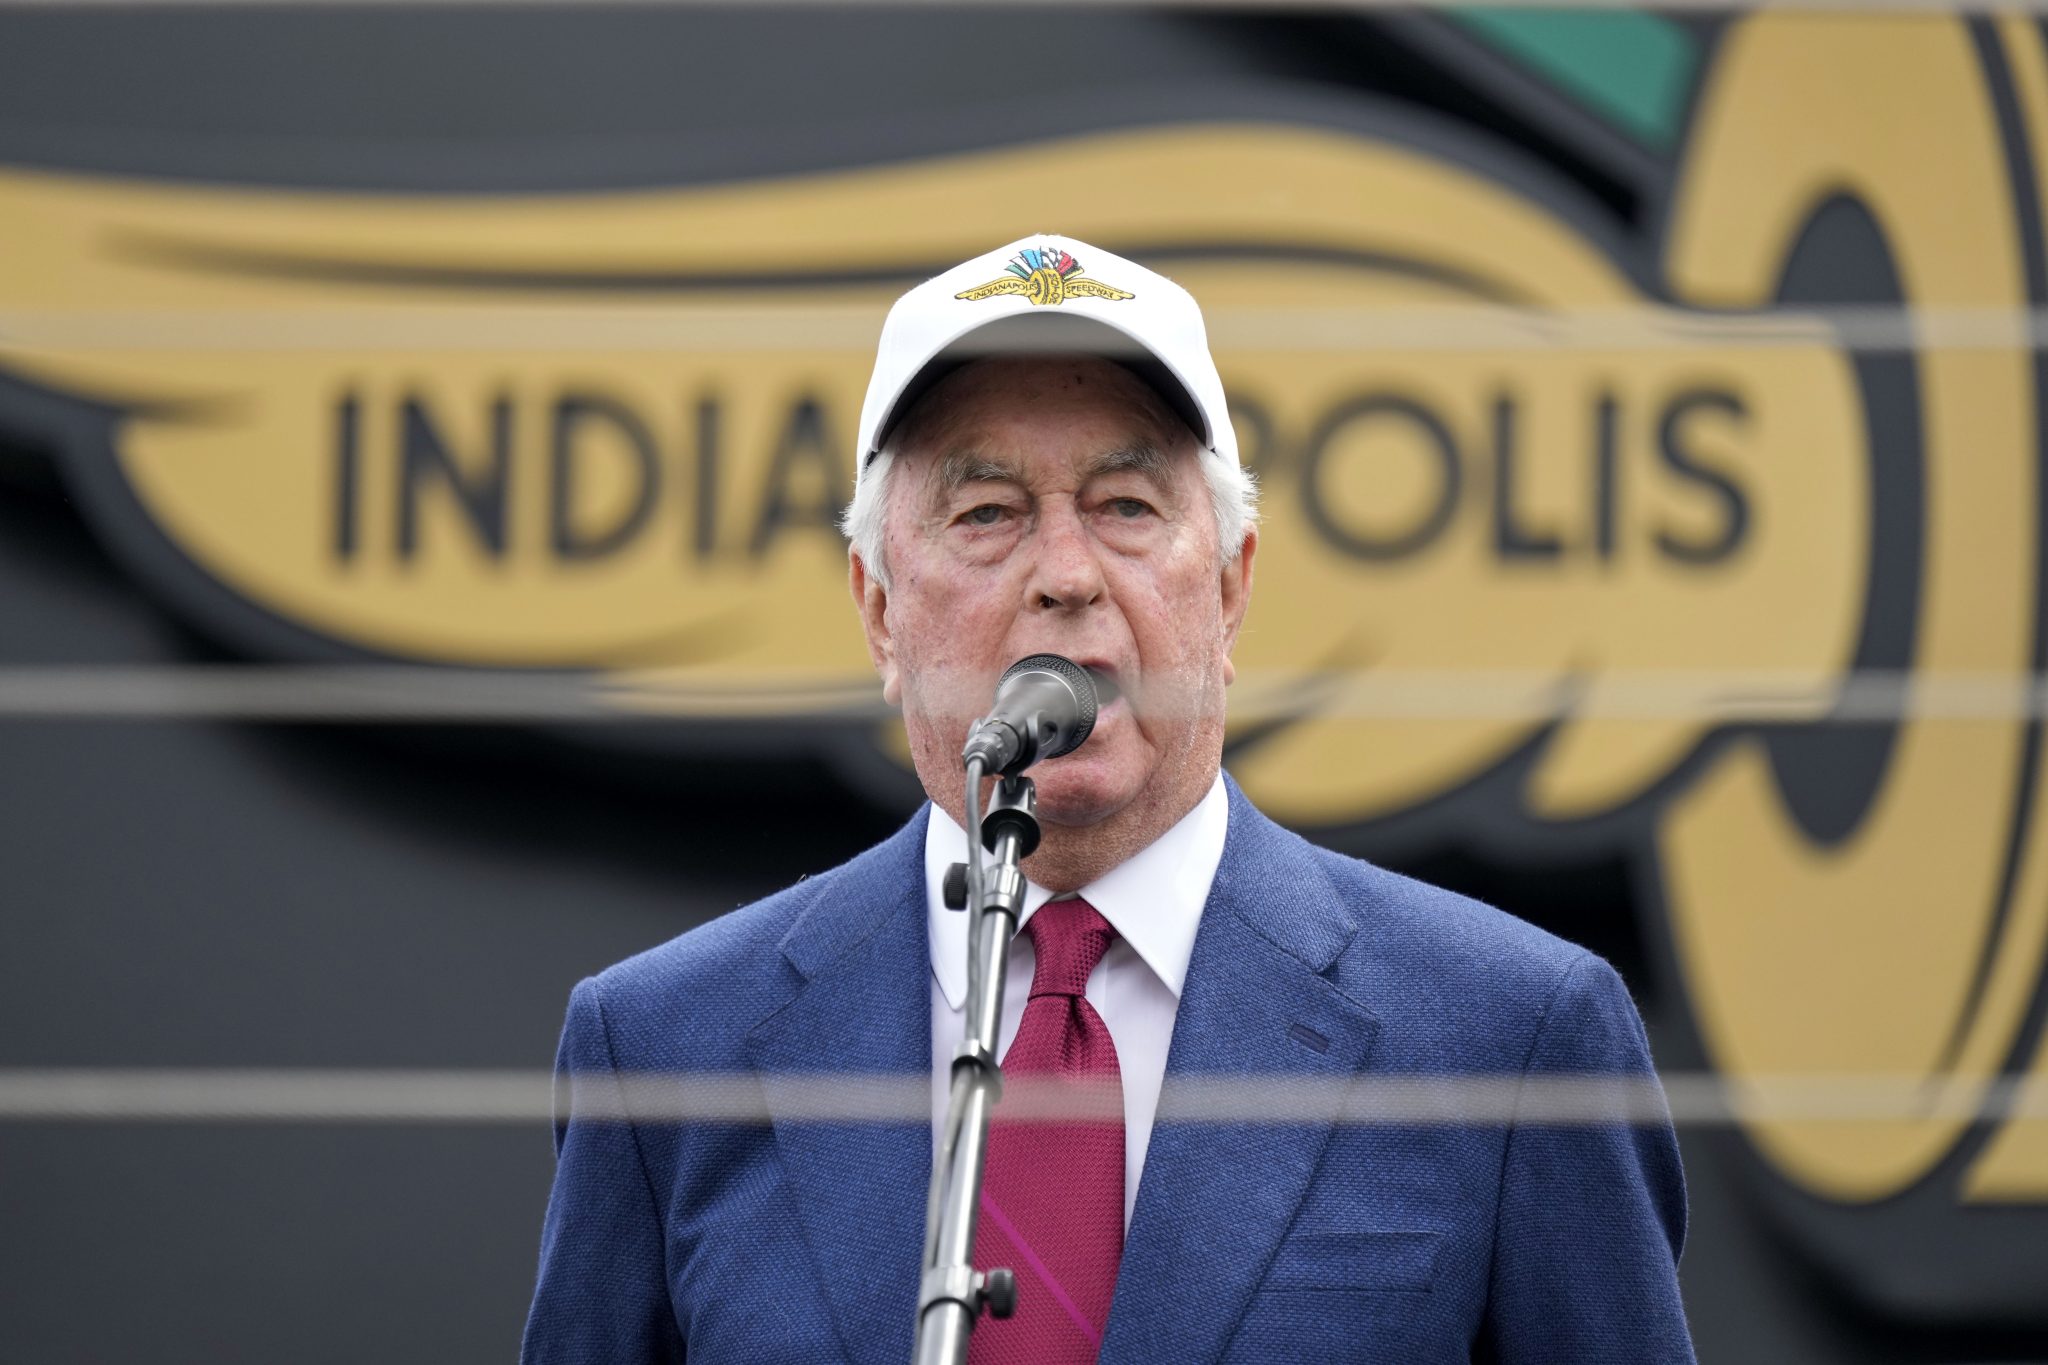 Indianapolis Motor Speedway owner Roger Penske delivers the command "ladies and gentlemen start your engines" before the start of the Indianapolis 500 auto race at Indianapolis Motor Speedway in Indianapolis, Sunday, May 28, 2023.